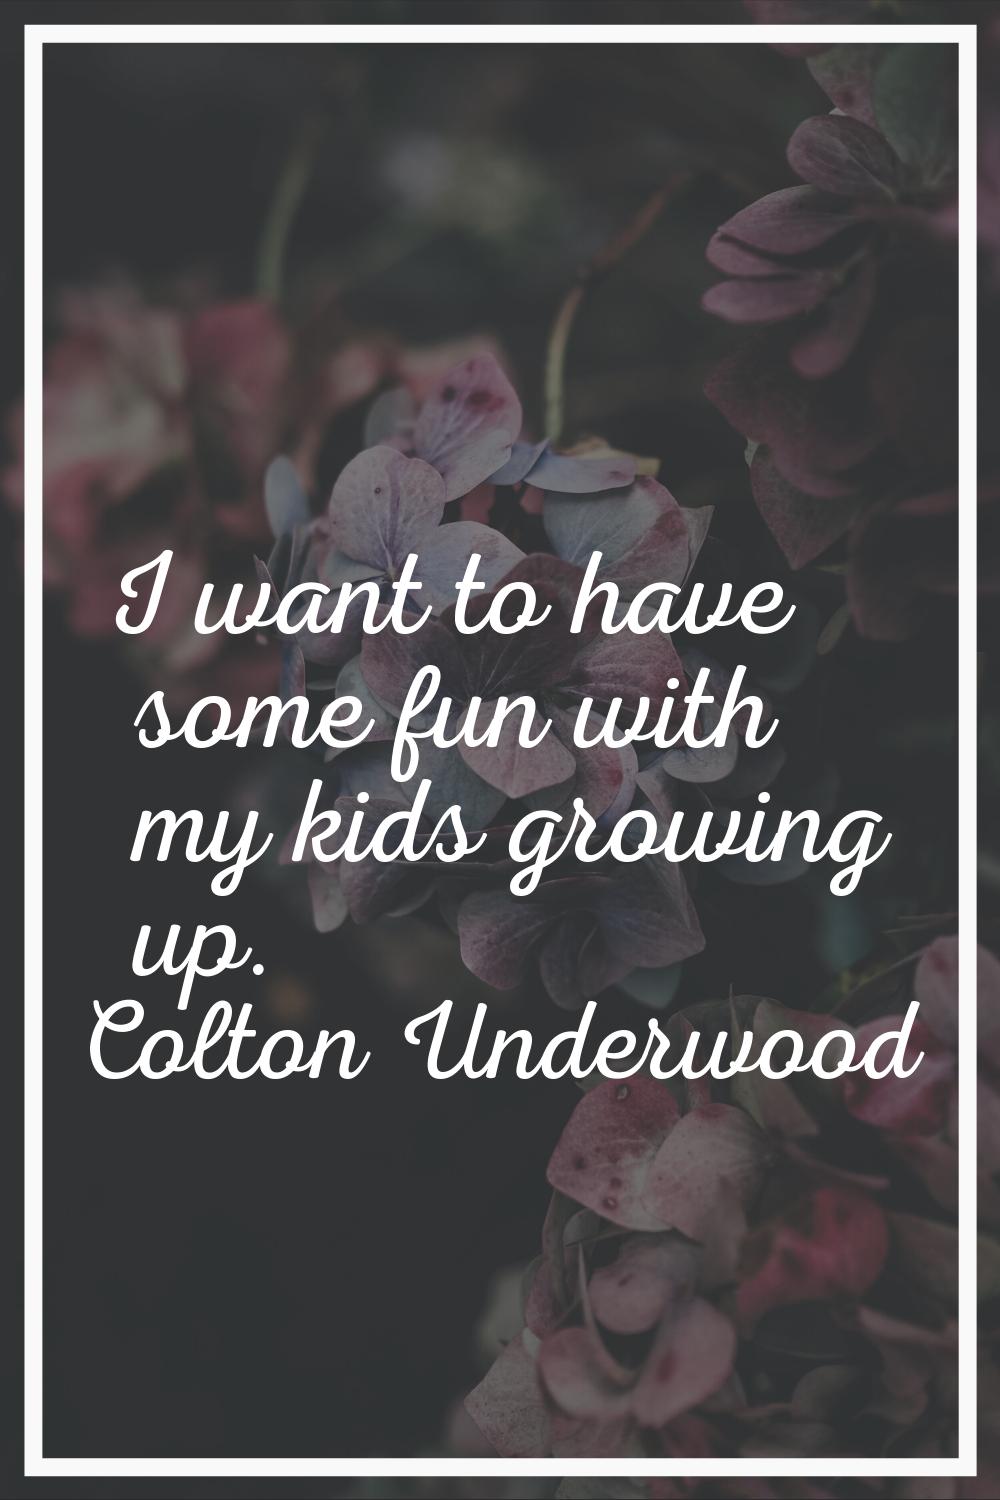 I want to have some fun with my kids growing up.